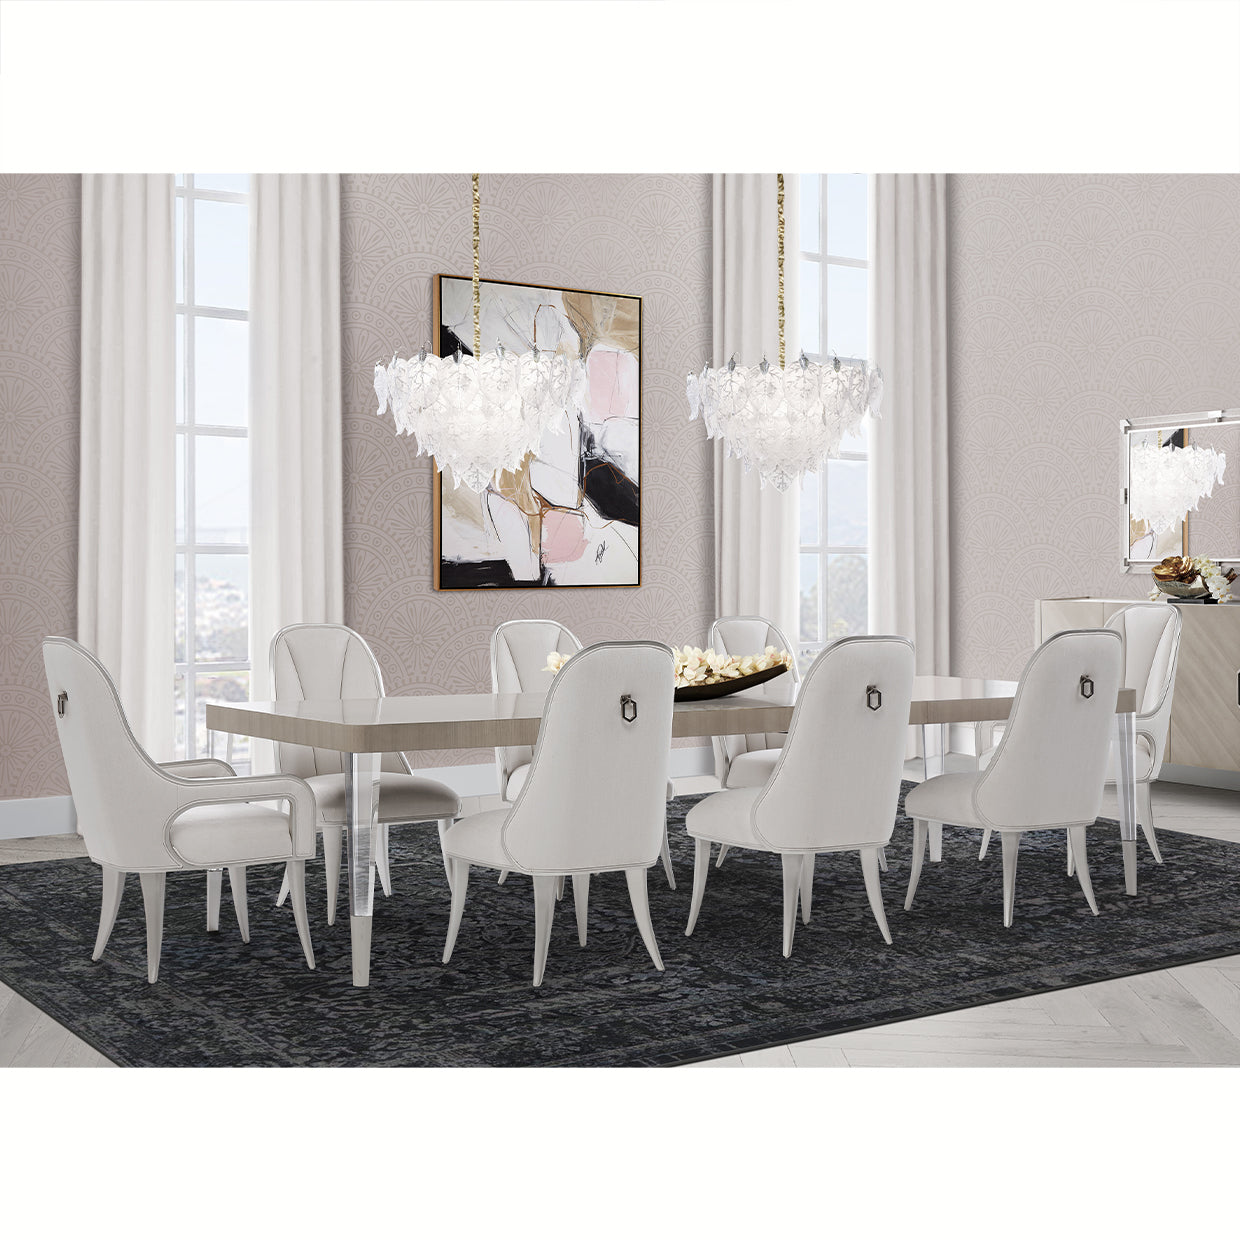 PENTHOUSE Rectangular Dining Table (Includes: 2 X 22 Leaves) - Dream art Gallery